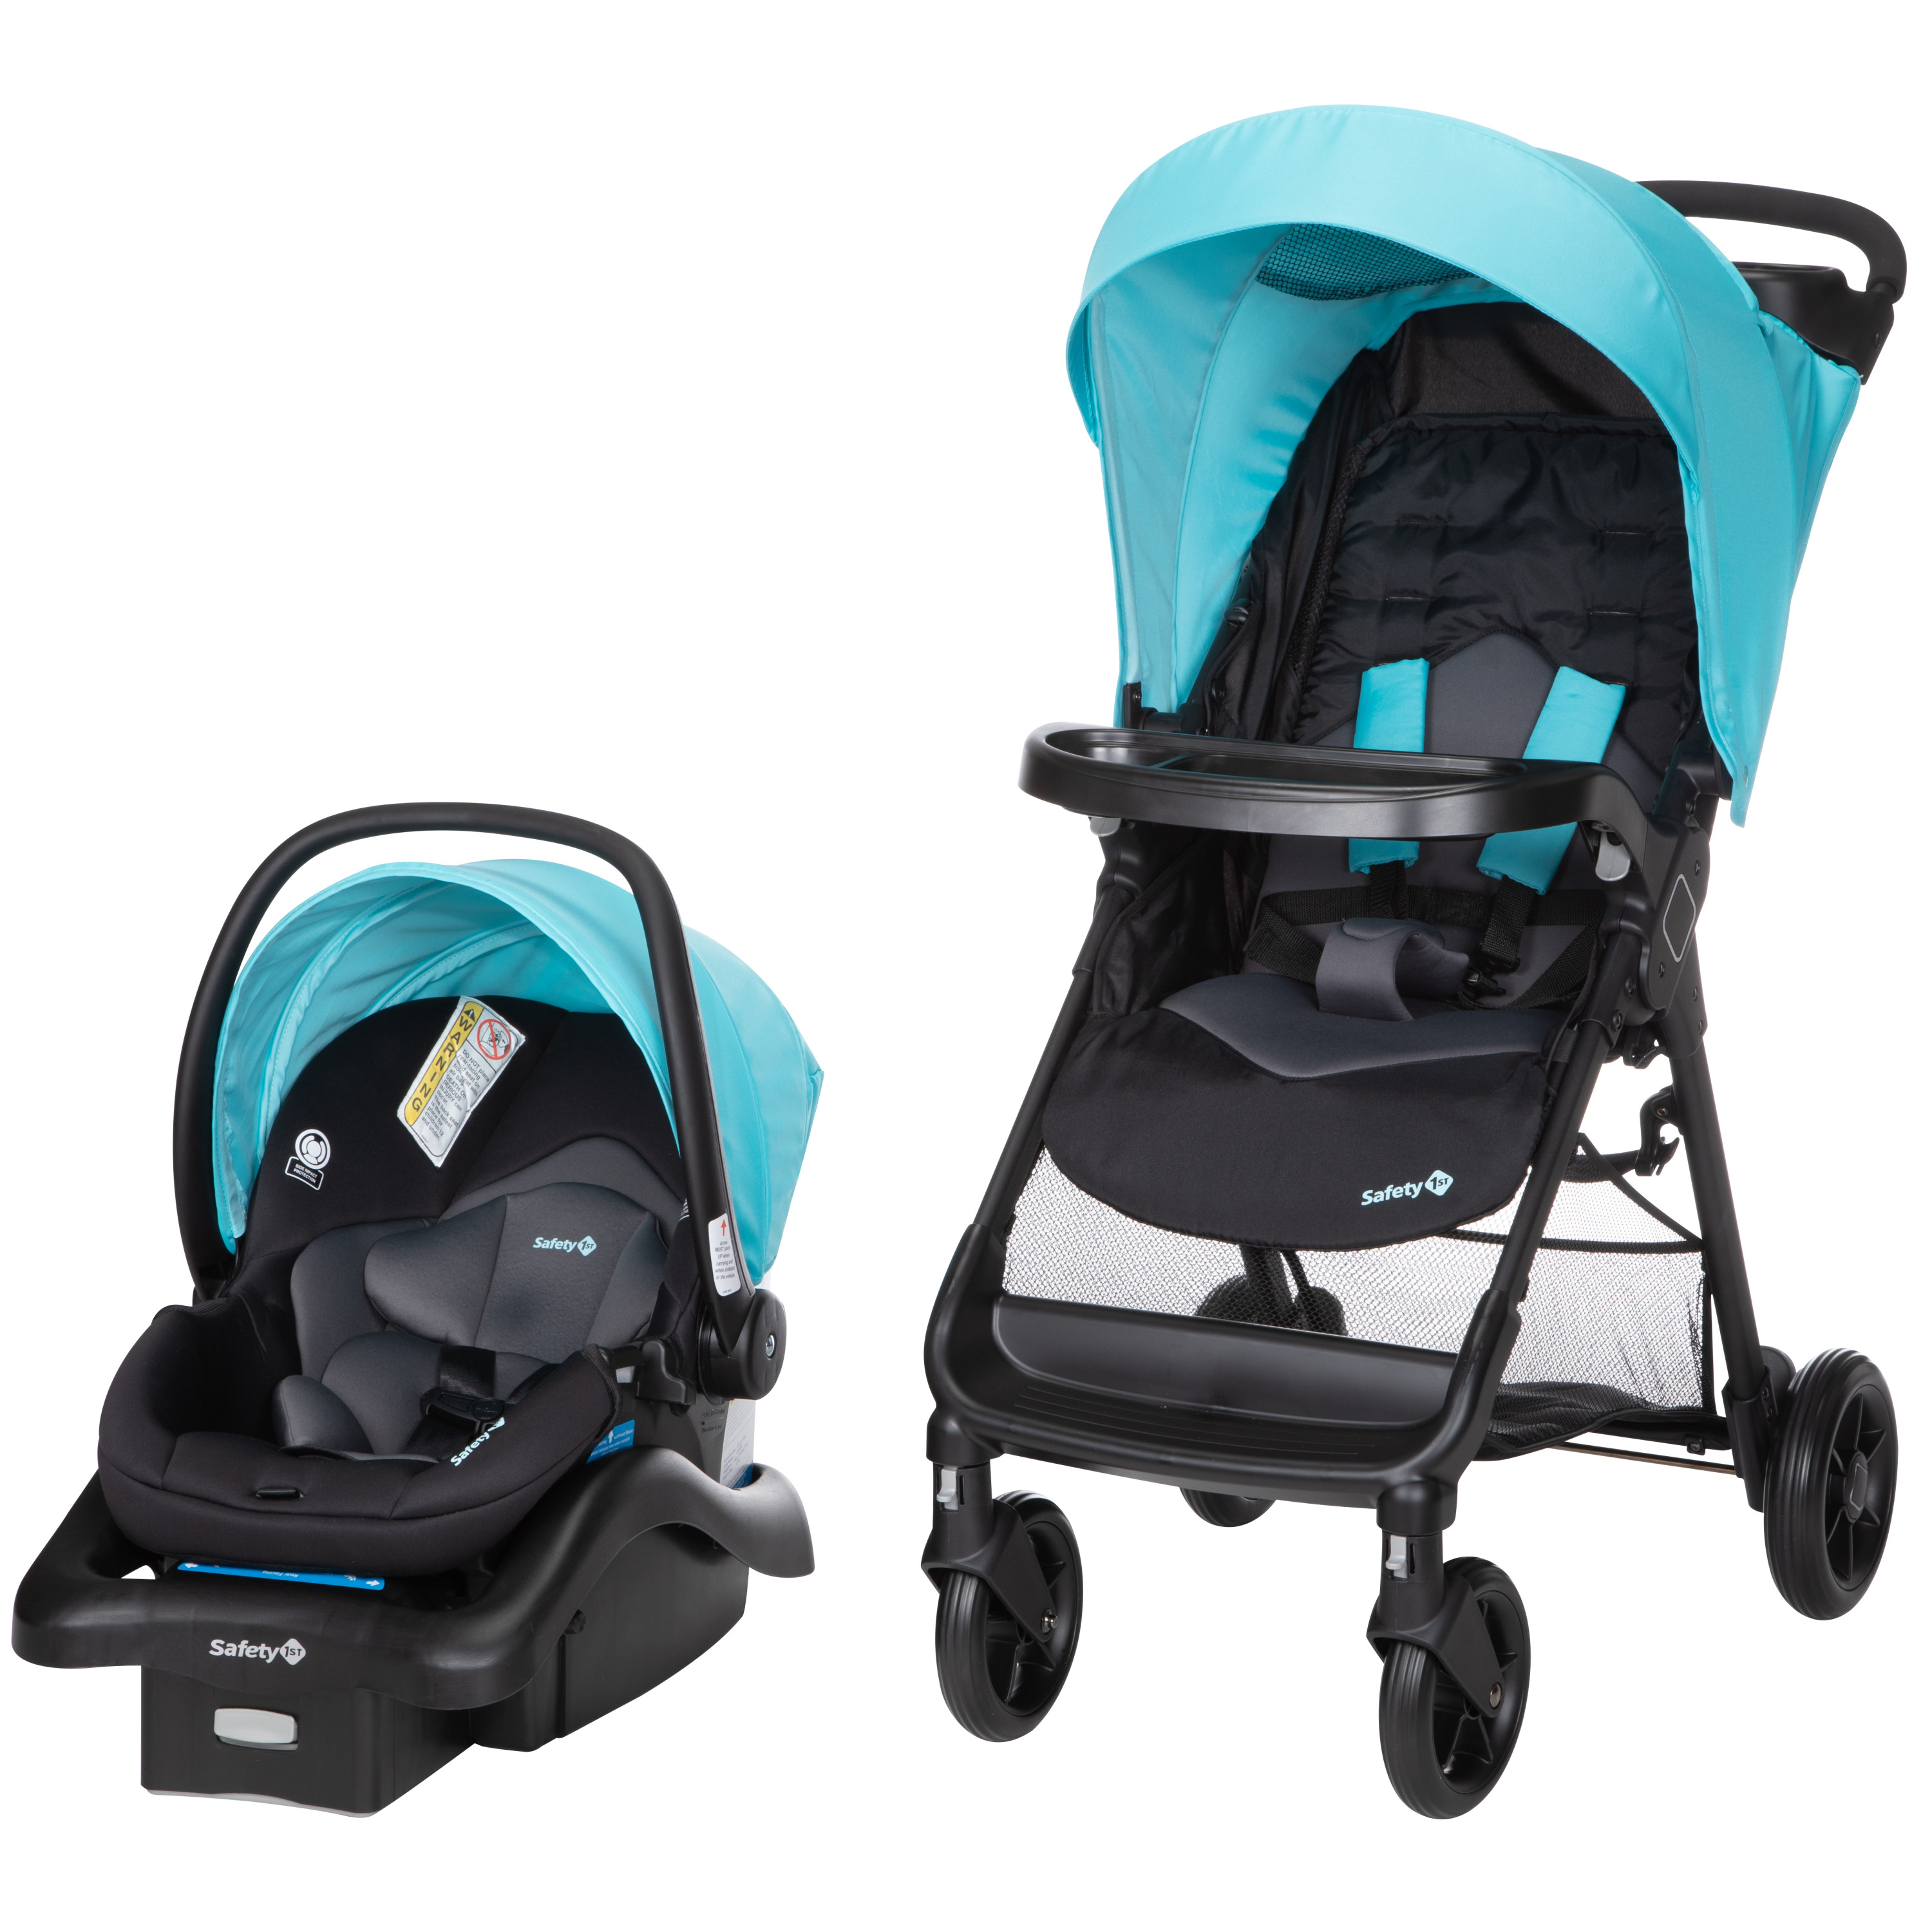 Safety 1ˢᵗ Smooth Ride Travel System Stroller and Infant Car Seat, Skyfall - image 1 of 22